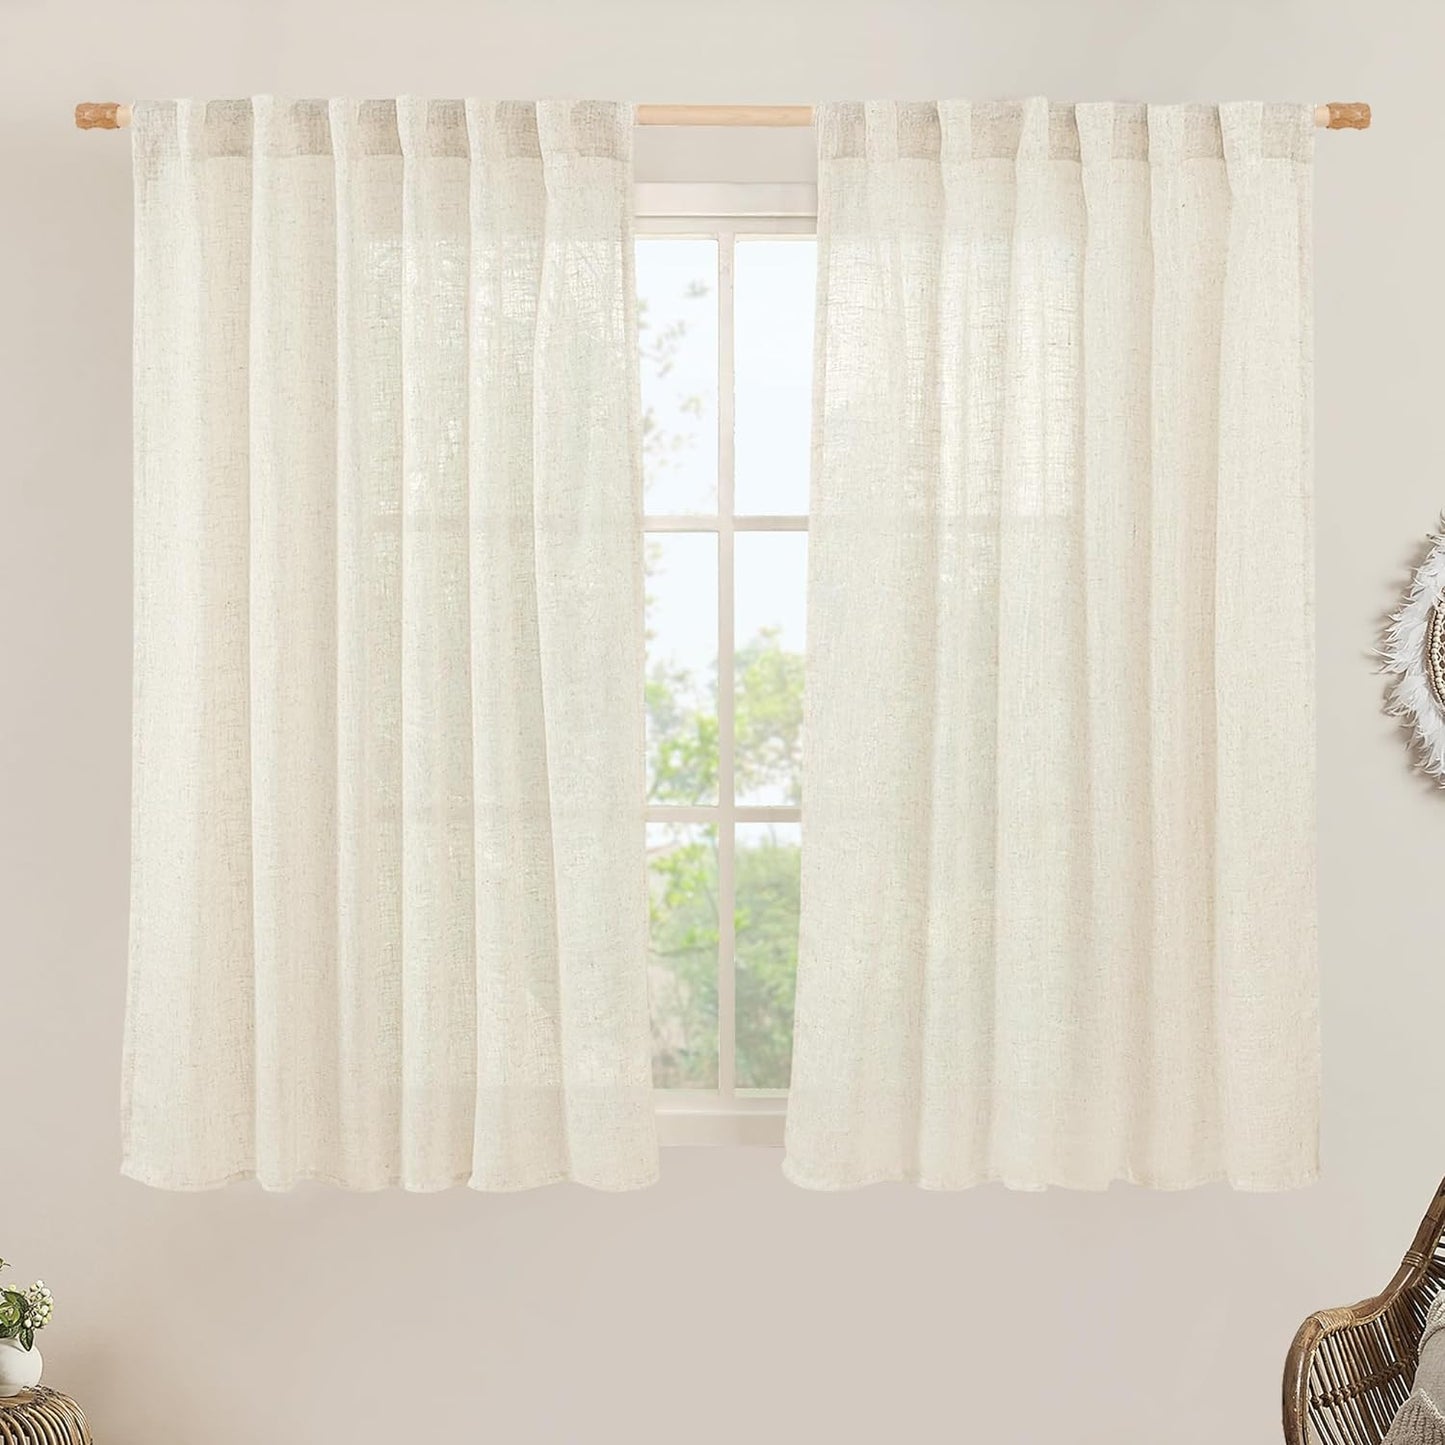 LAMIT Natural Linen Blended Curtains for Living Room, Back Tab and Rod Pocket Semi Sheer Curtains Light Filtering Country Rustic Drapes for Bedroom/Farmhouse, 2 Panels,52 X 108 Inch, Linen  LAMIT Natural 52W X 54L 